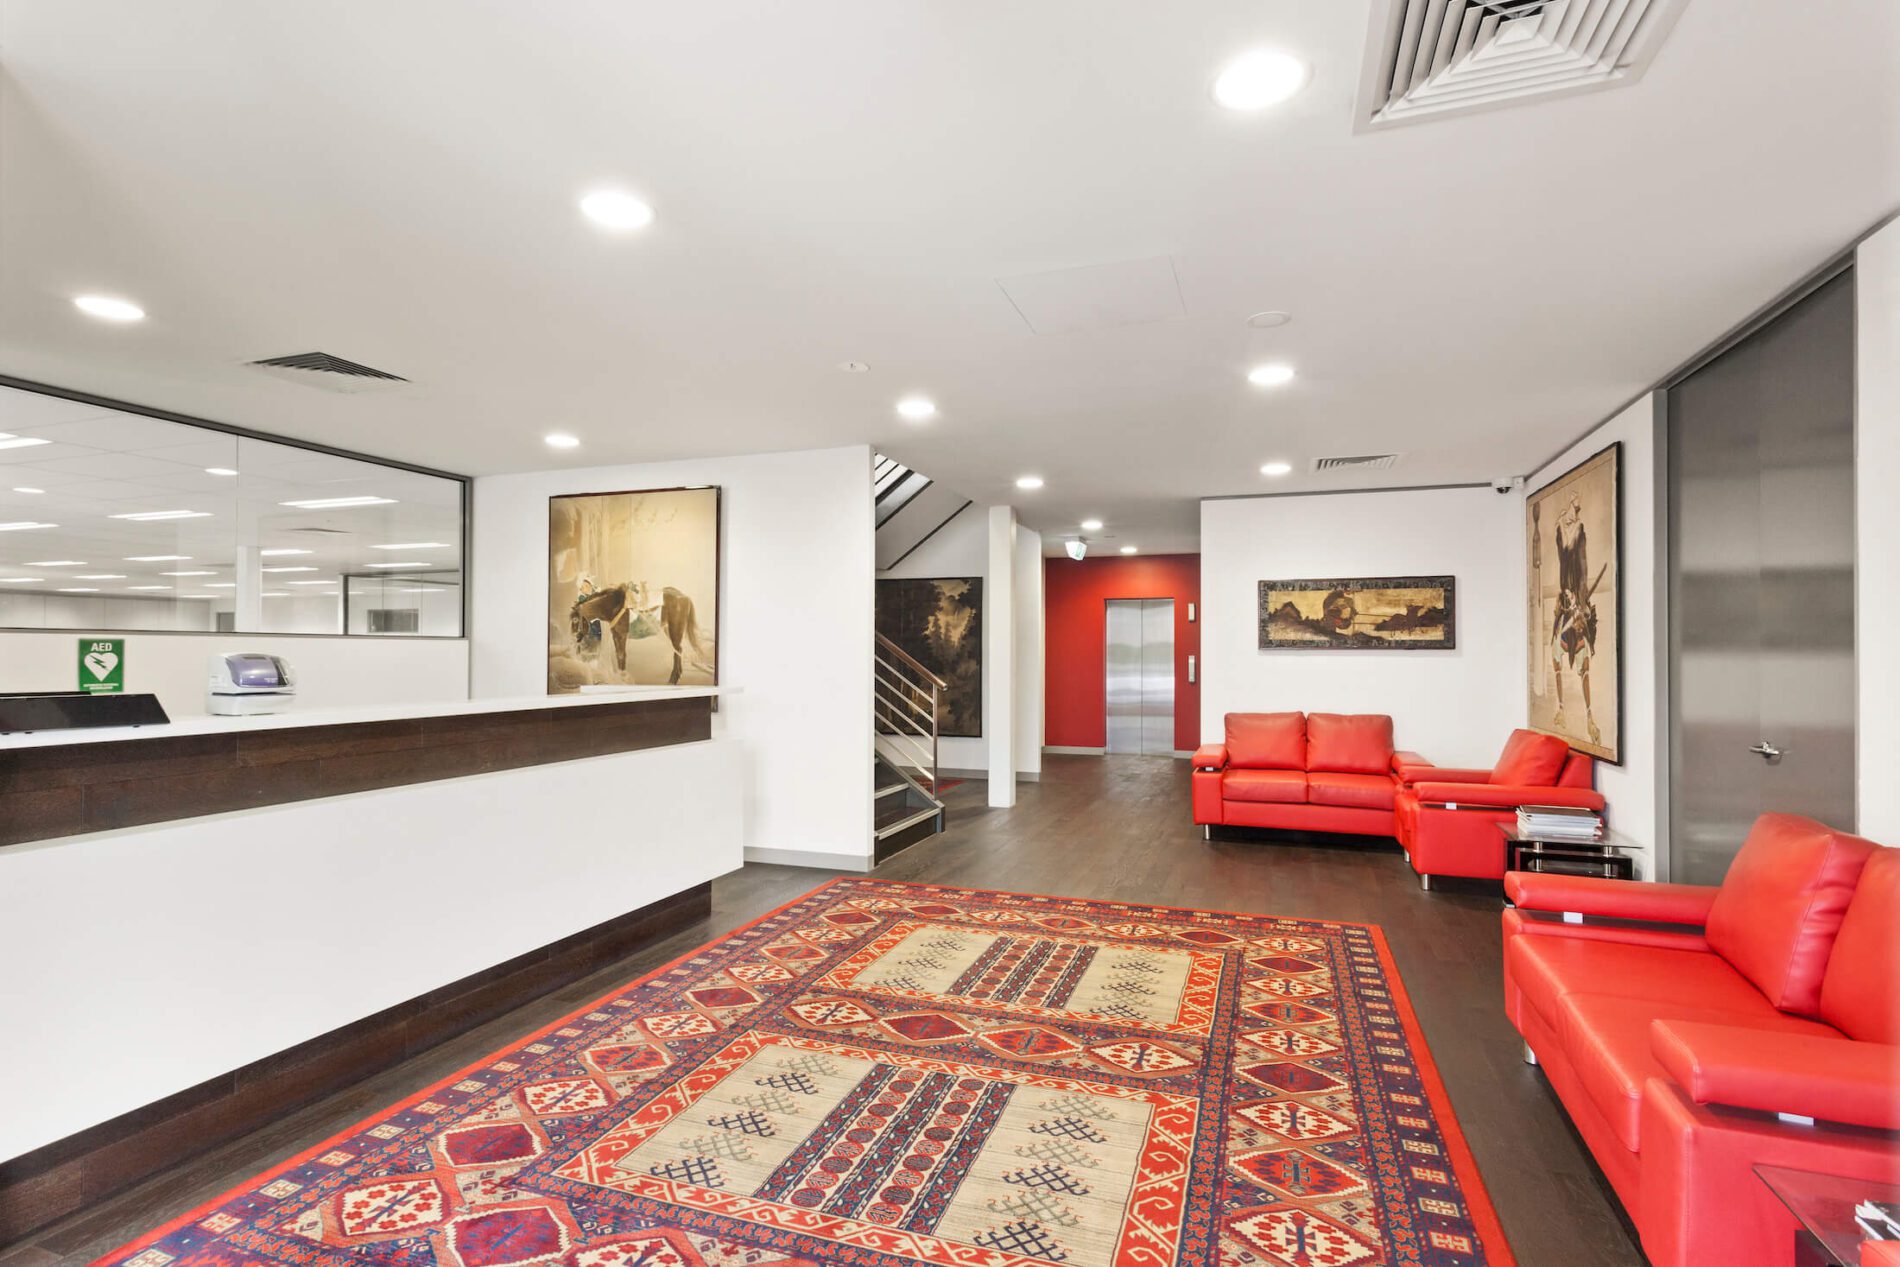 Foyer area in reception with red leather couches, rug on floor and artwork on walls